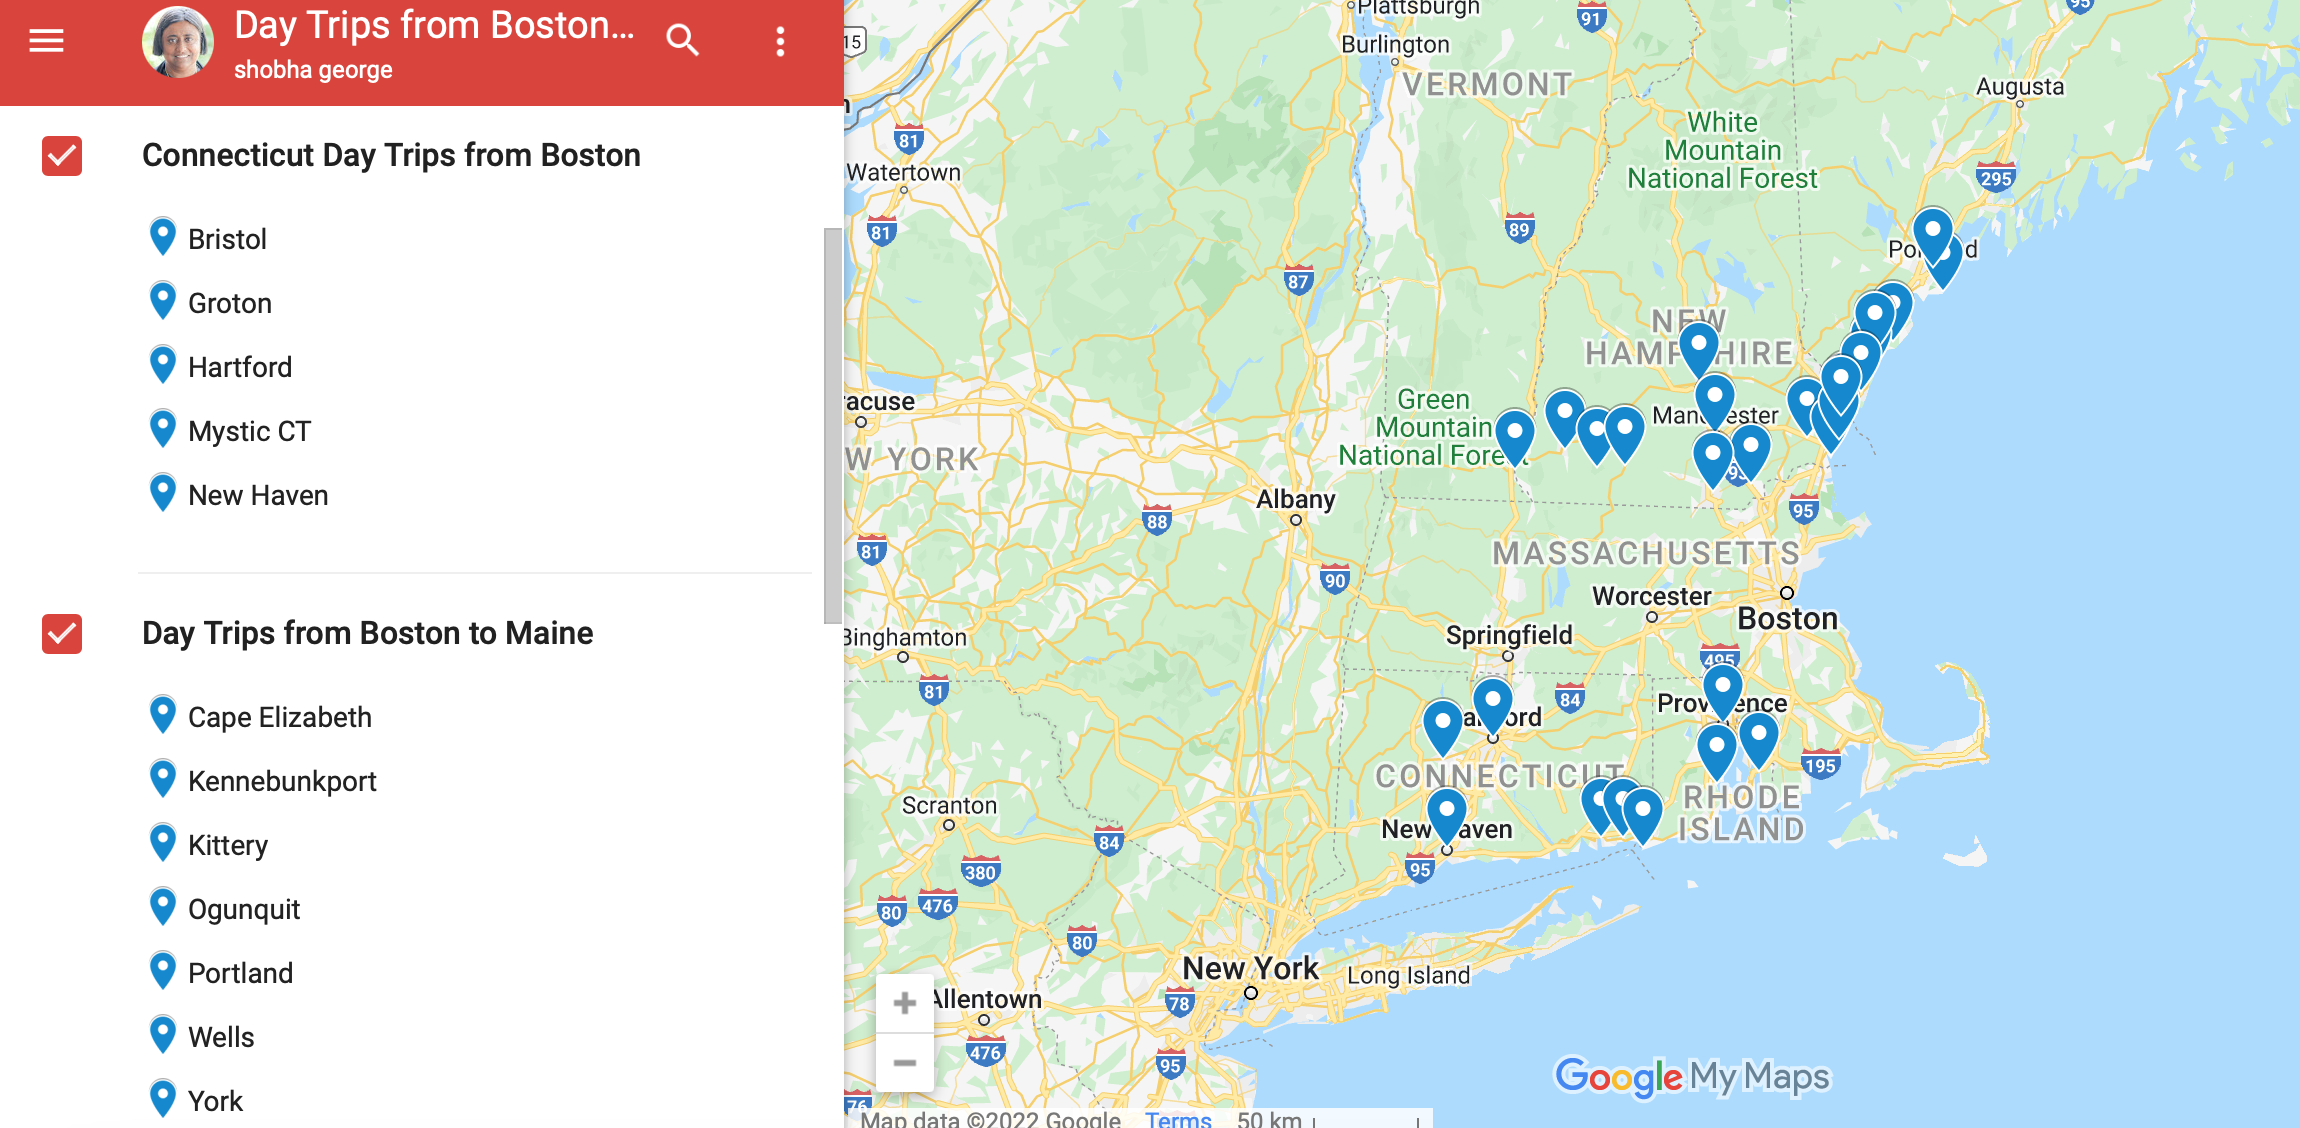 day trip suggestions from Boston to states in New England outside of Massachusetts